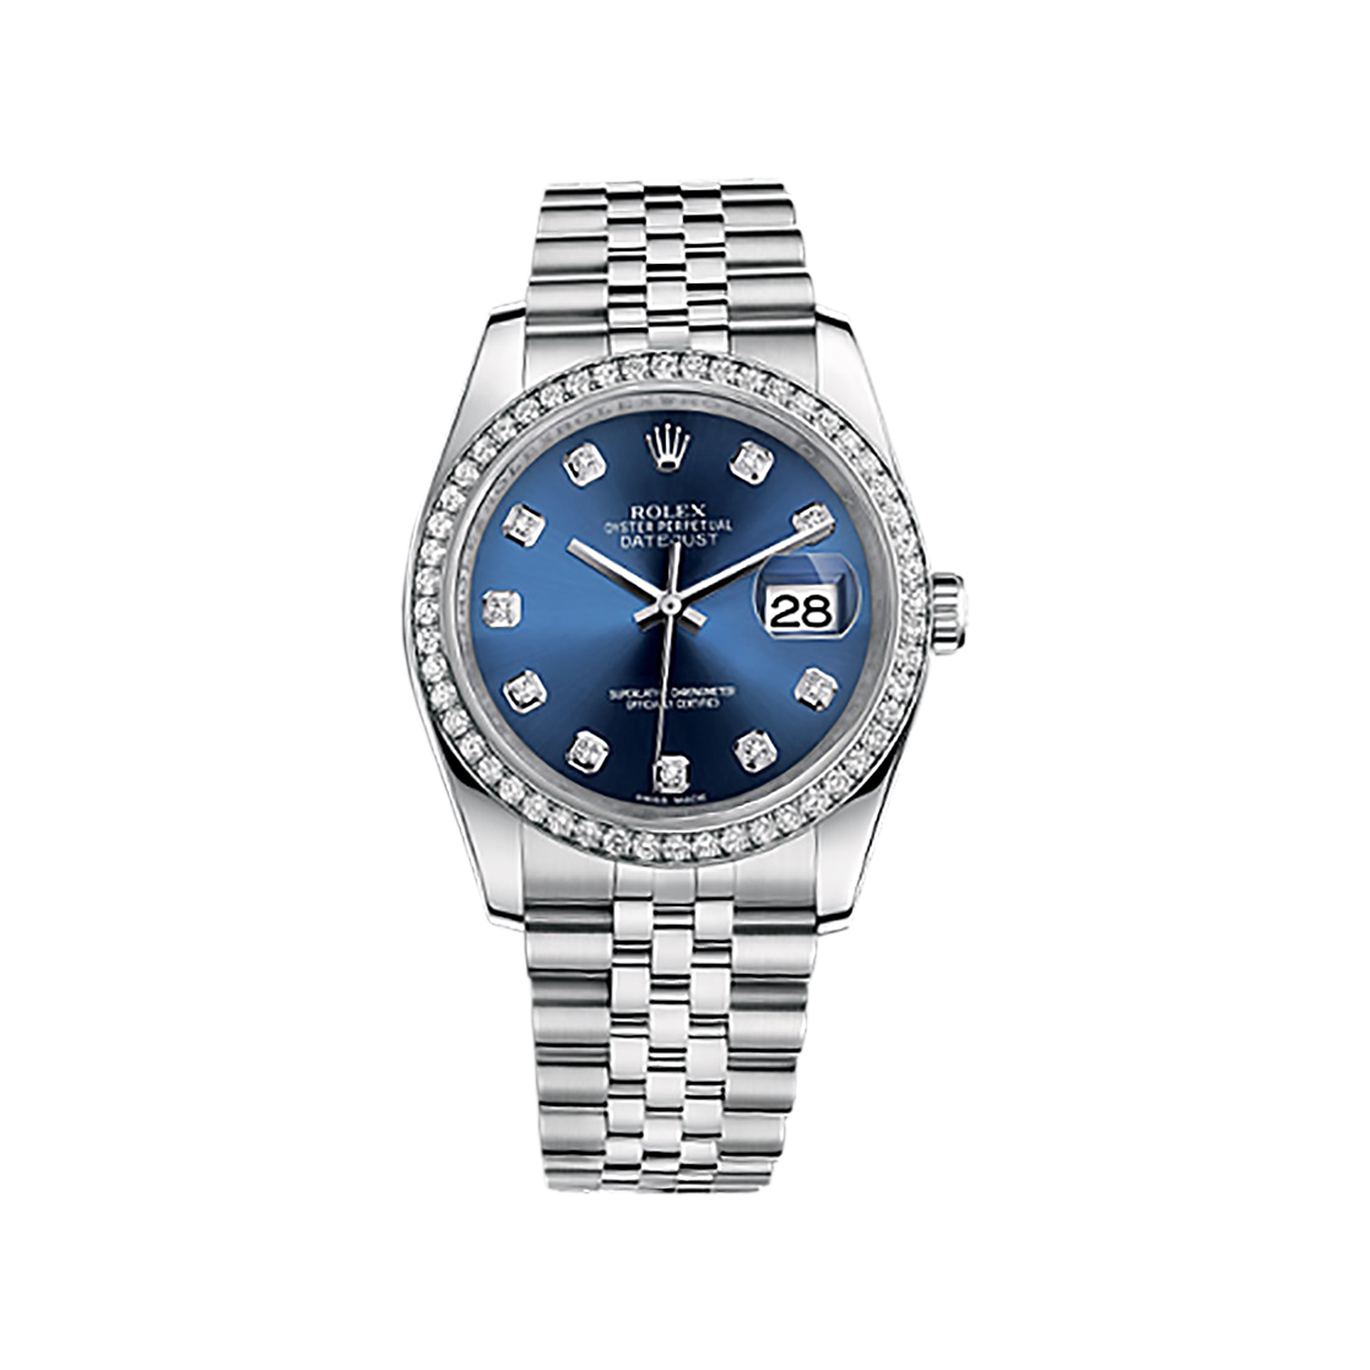 Datejust 36 116244 White Gold & Stainless Steel Watch (Blue Set with Diamonds)